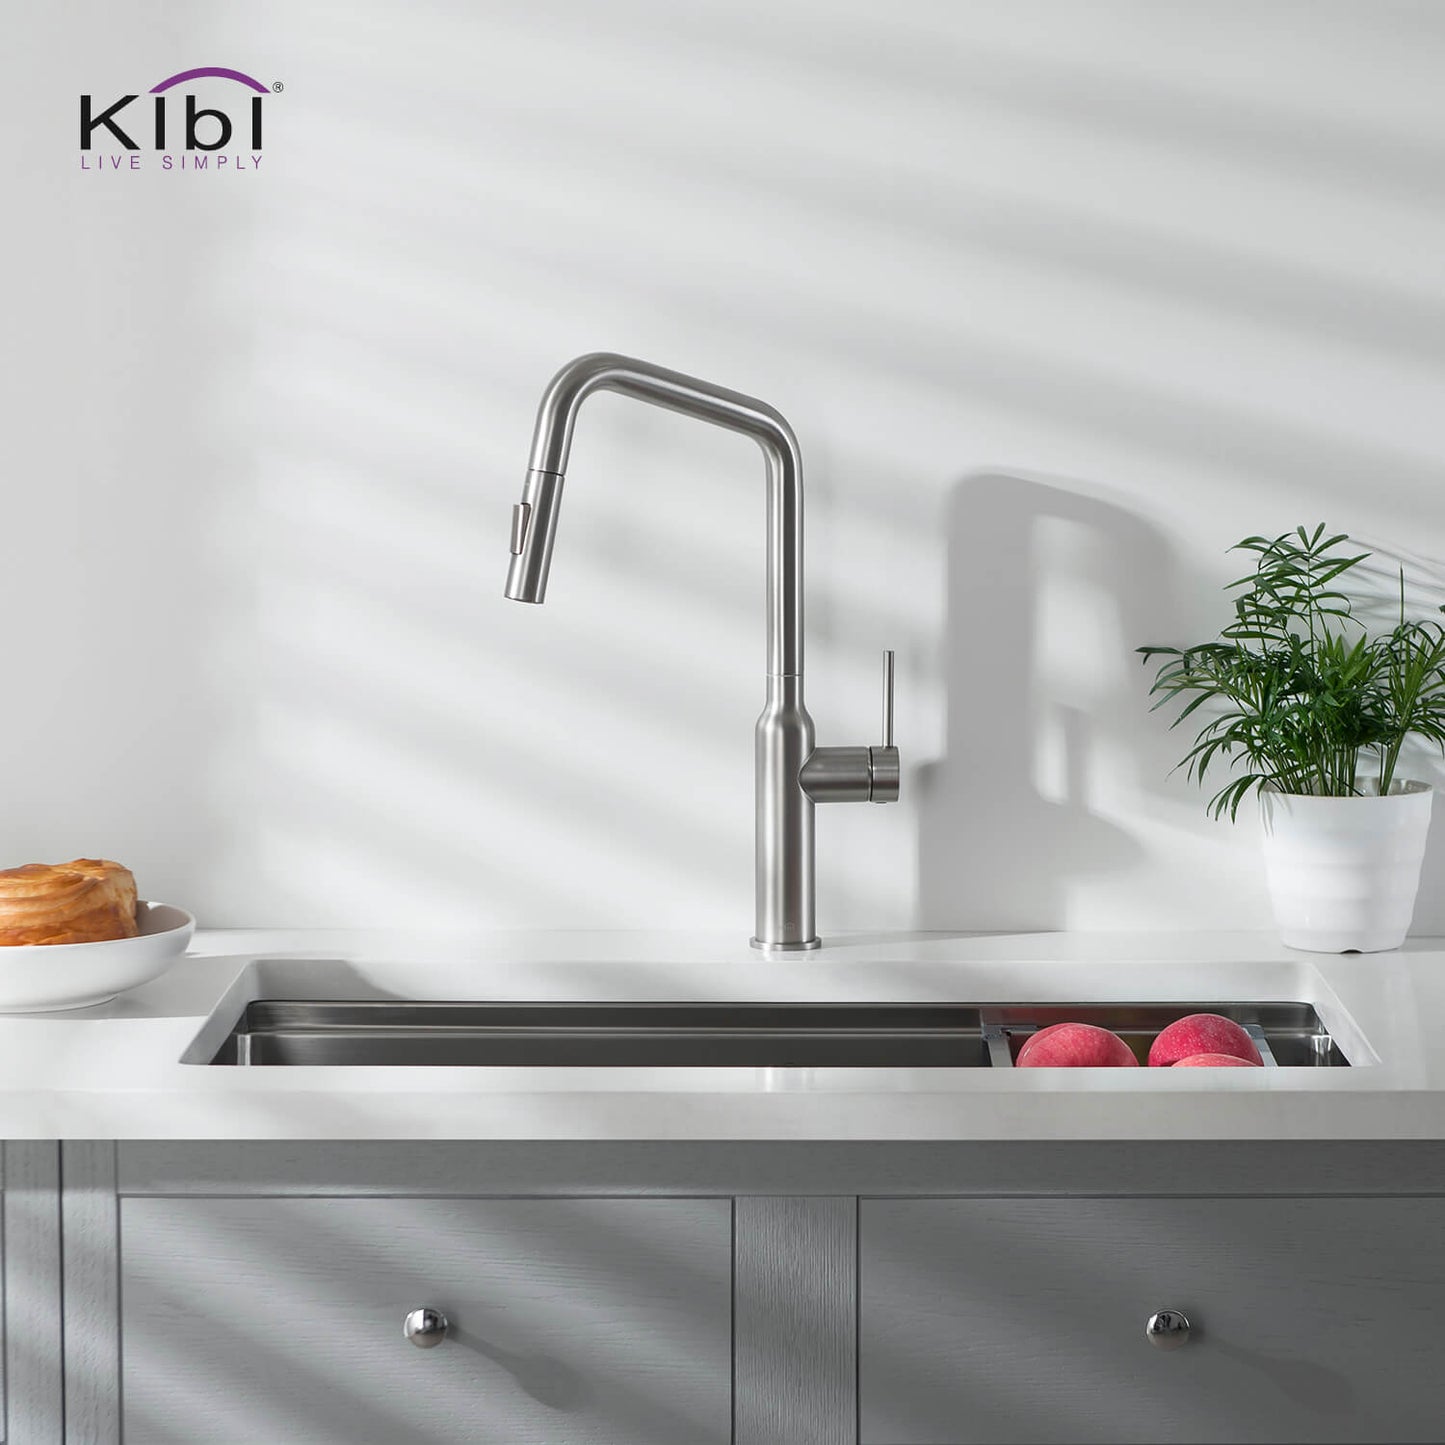 Kibi Macon Single Handle High Arc Pull Down Kitchen Faucet in Brushed Nickel Finish